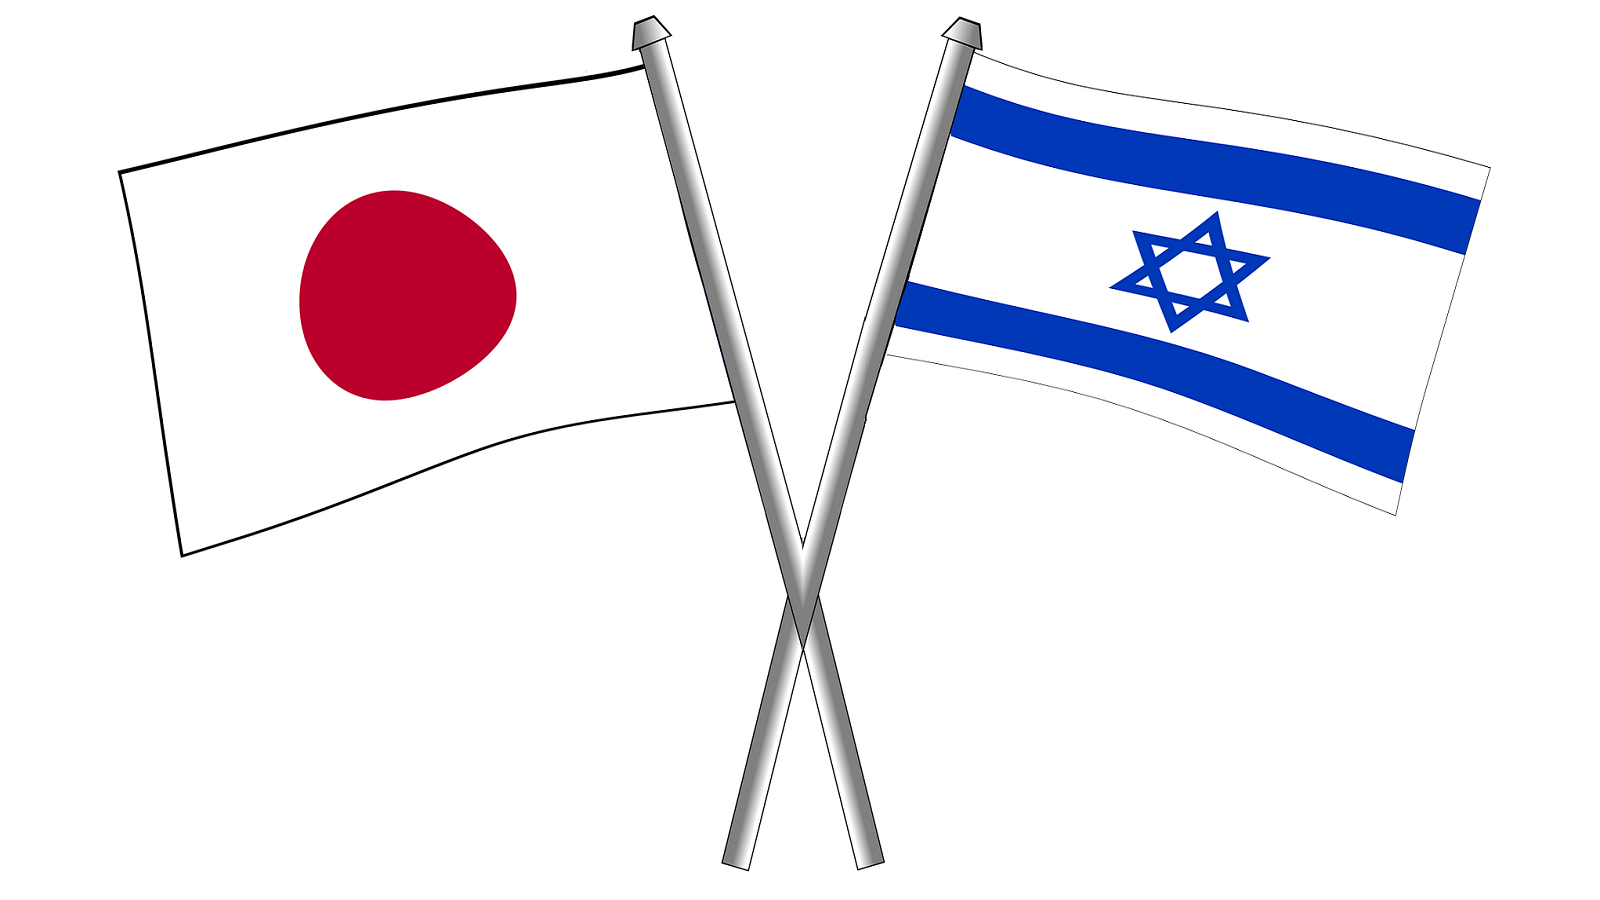 Deepening the Relations Between Israel and Japan